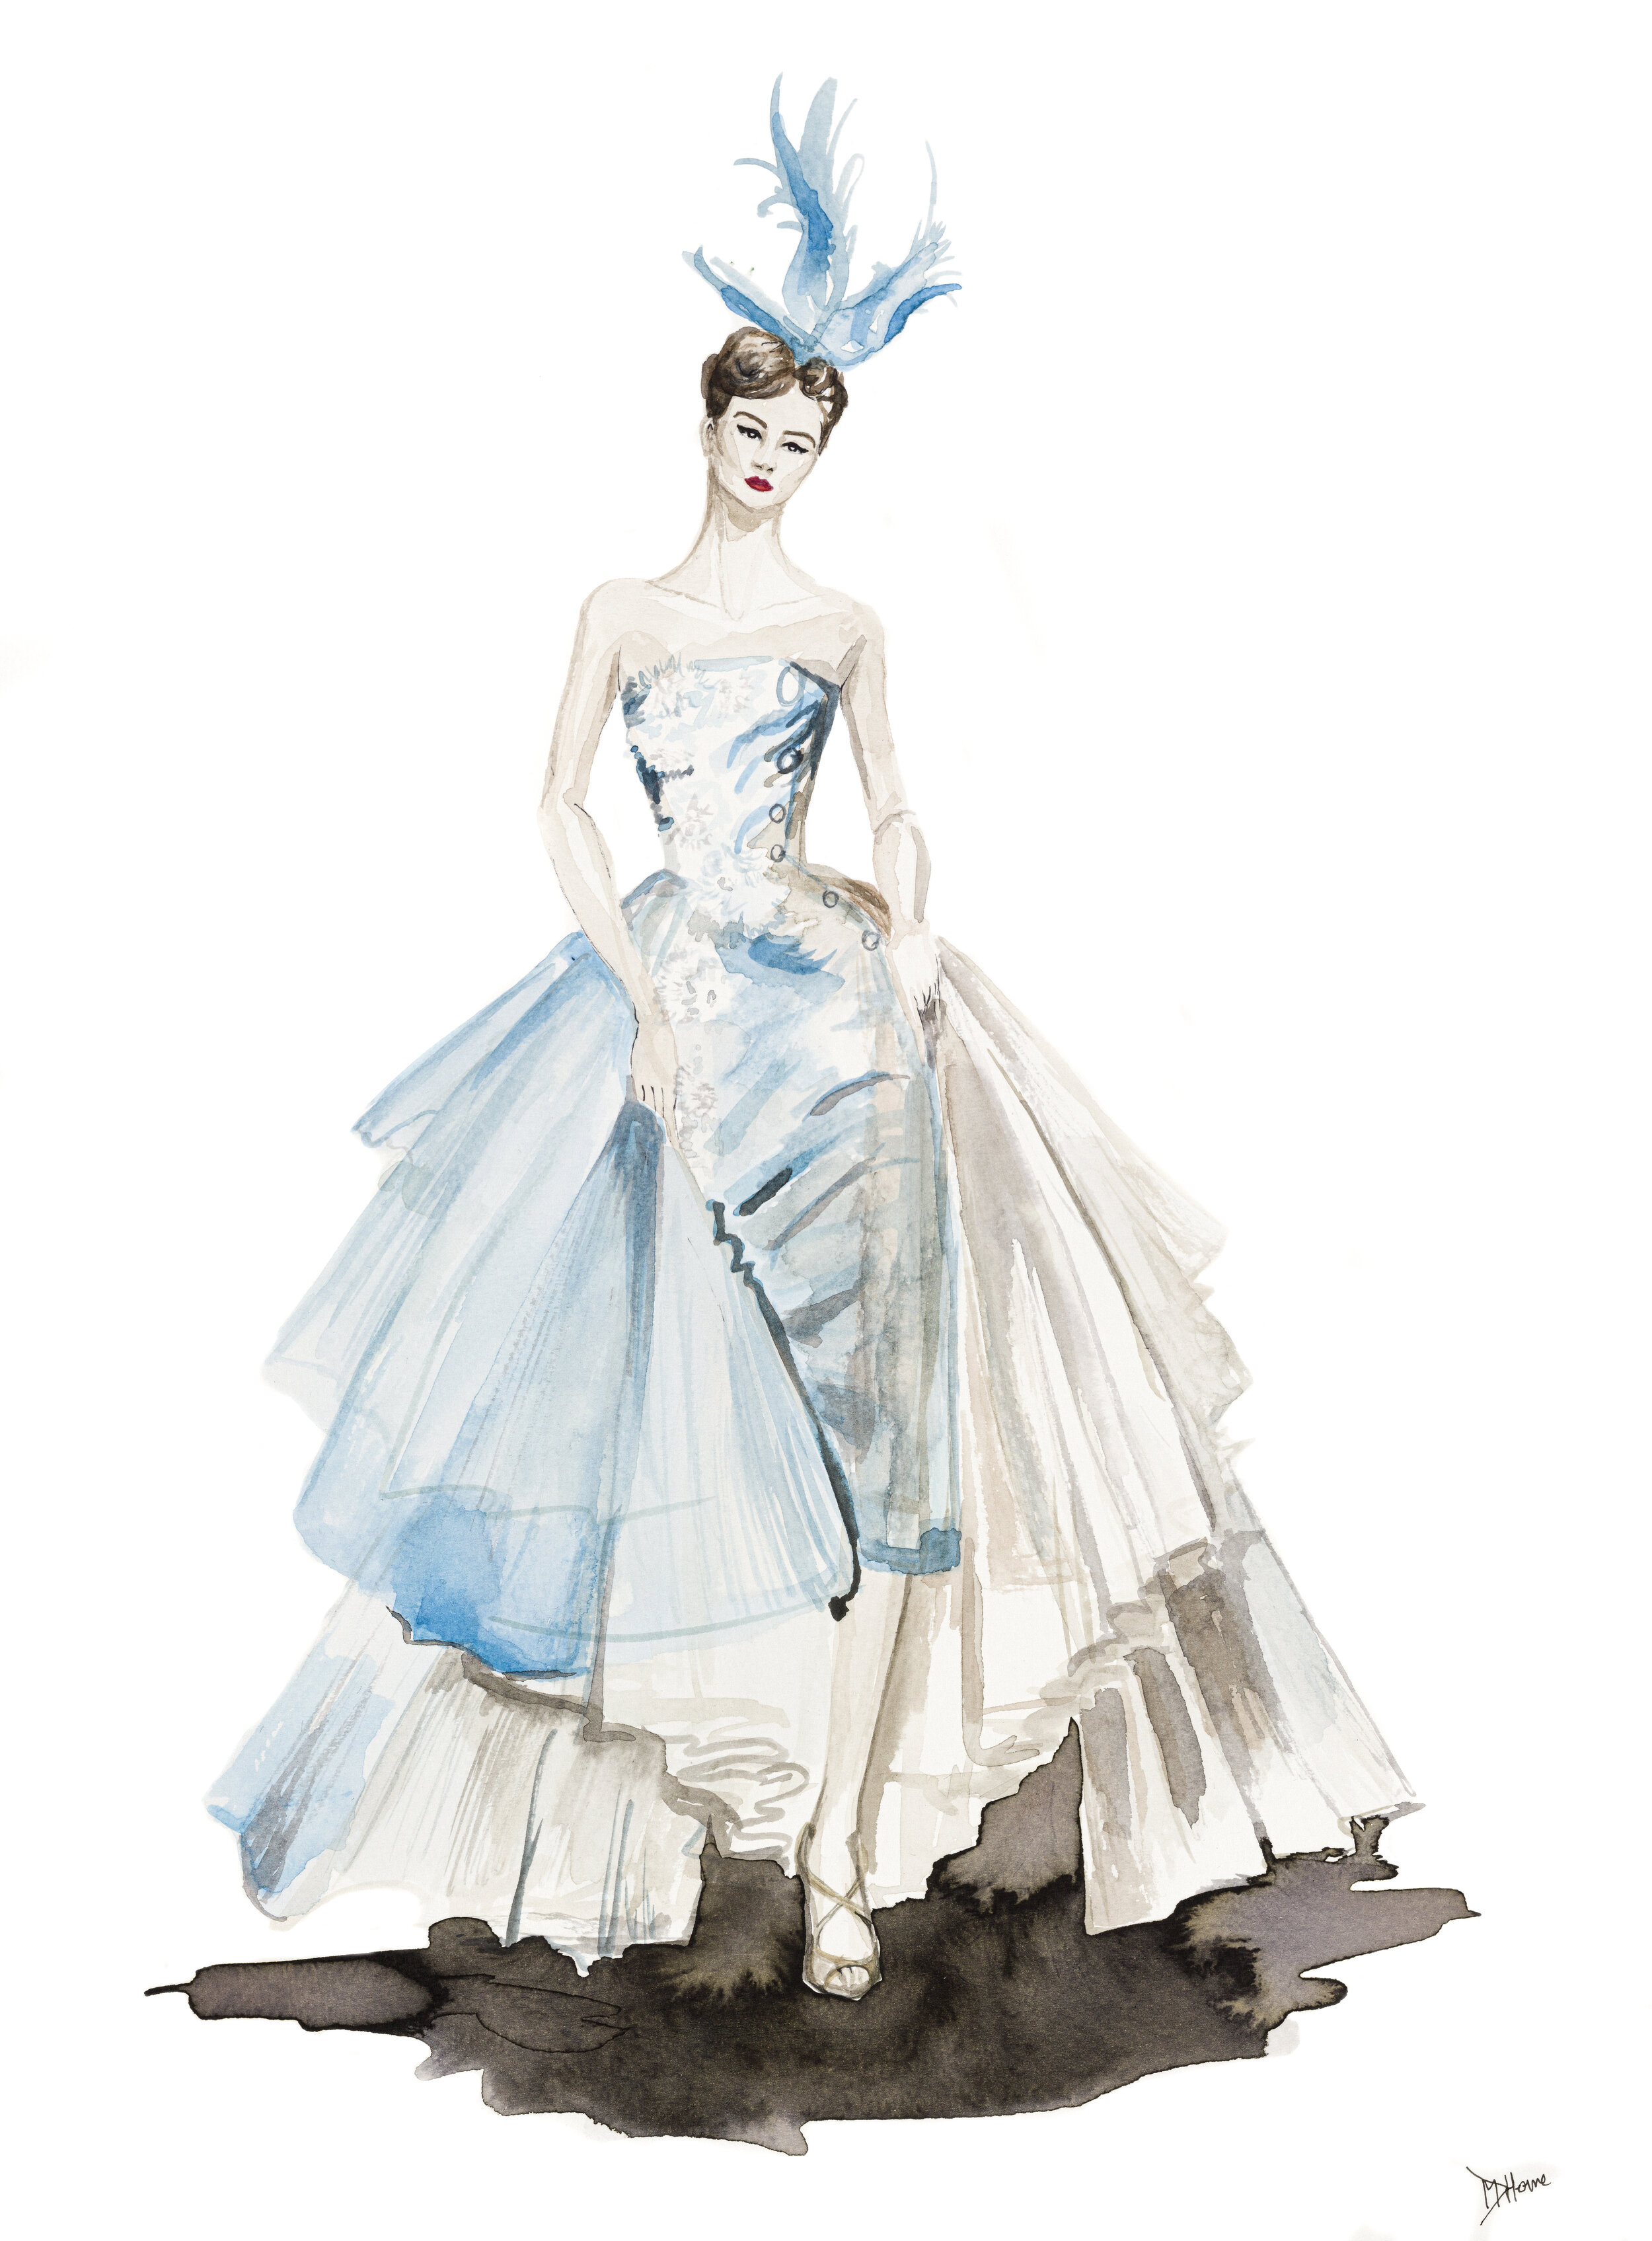 Copy- sketch for Christian Dior by John Galliano by Havdrot on DeviantArt